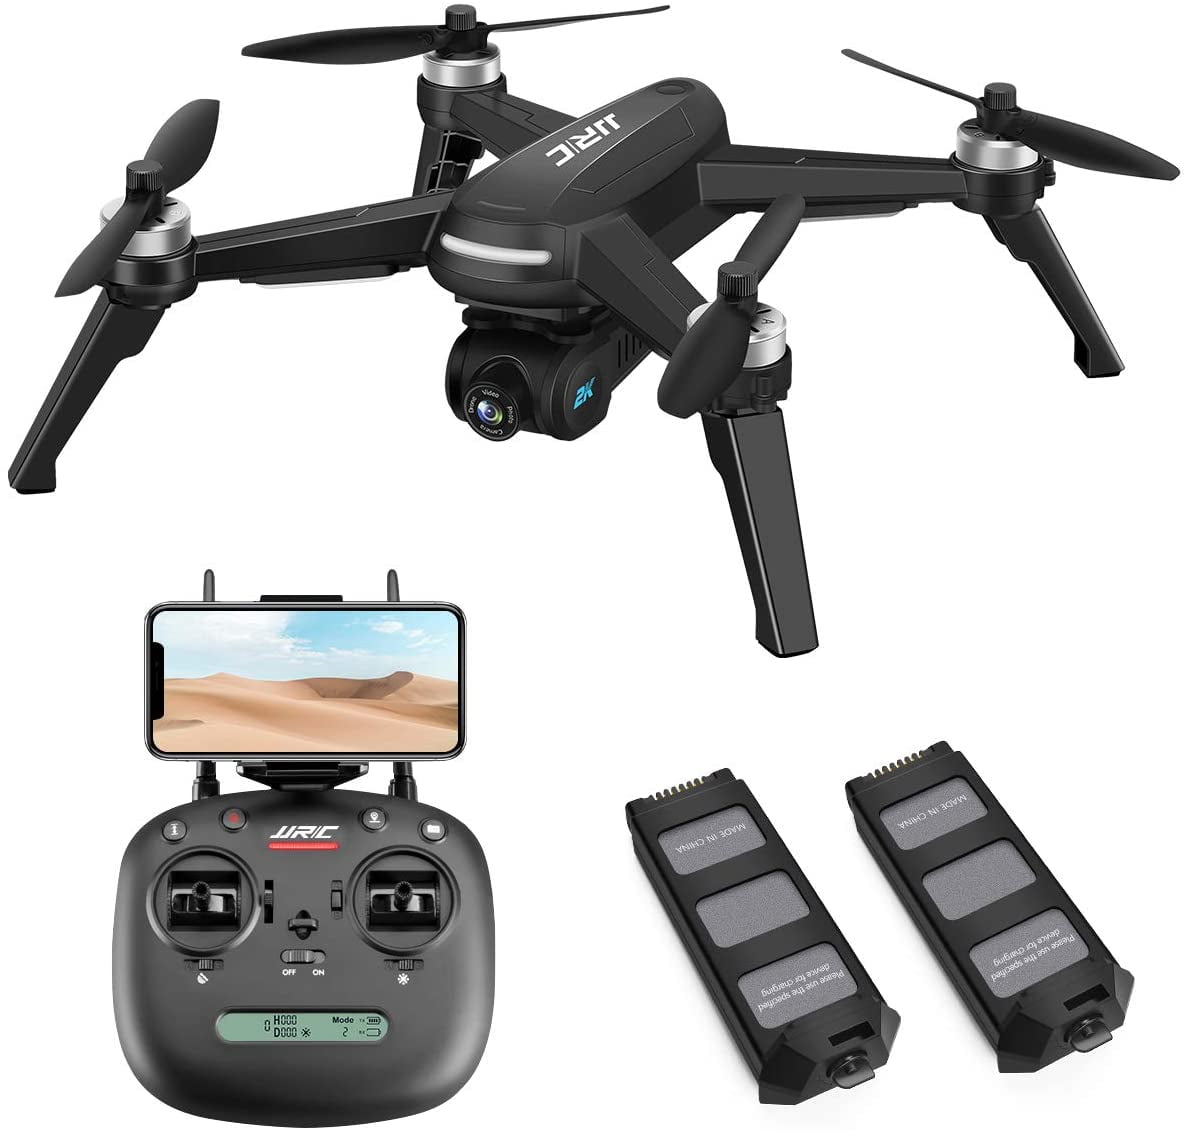 ratio Initially Technology JJRC X5 Brushless Drone 2K Camera WiFi FPV GPS Fixed Height Aerial  Photography Drone Quadcopter Black - Walmart.com